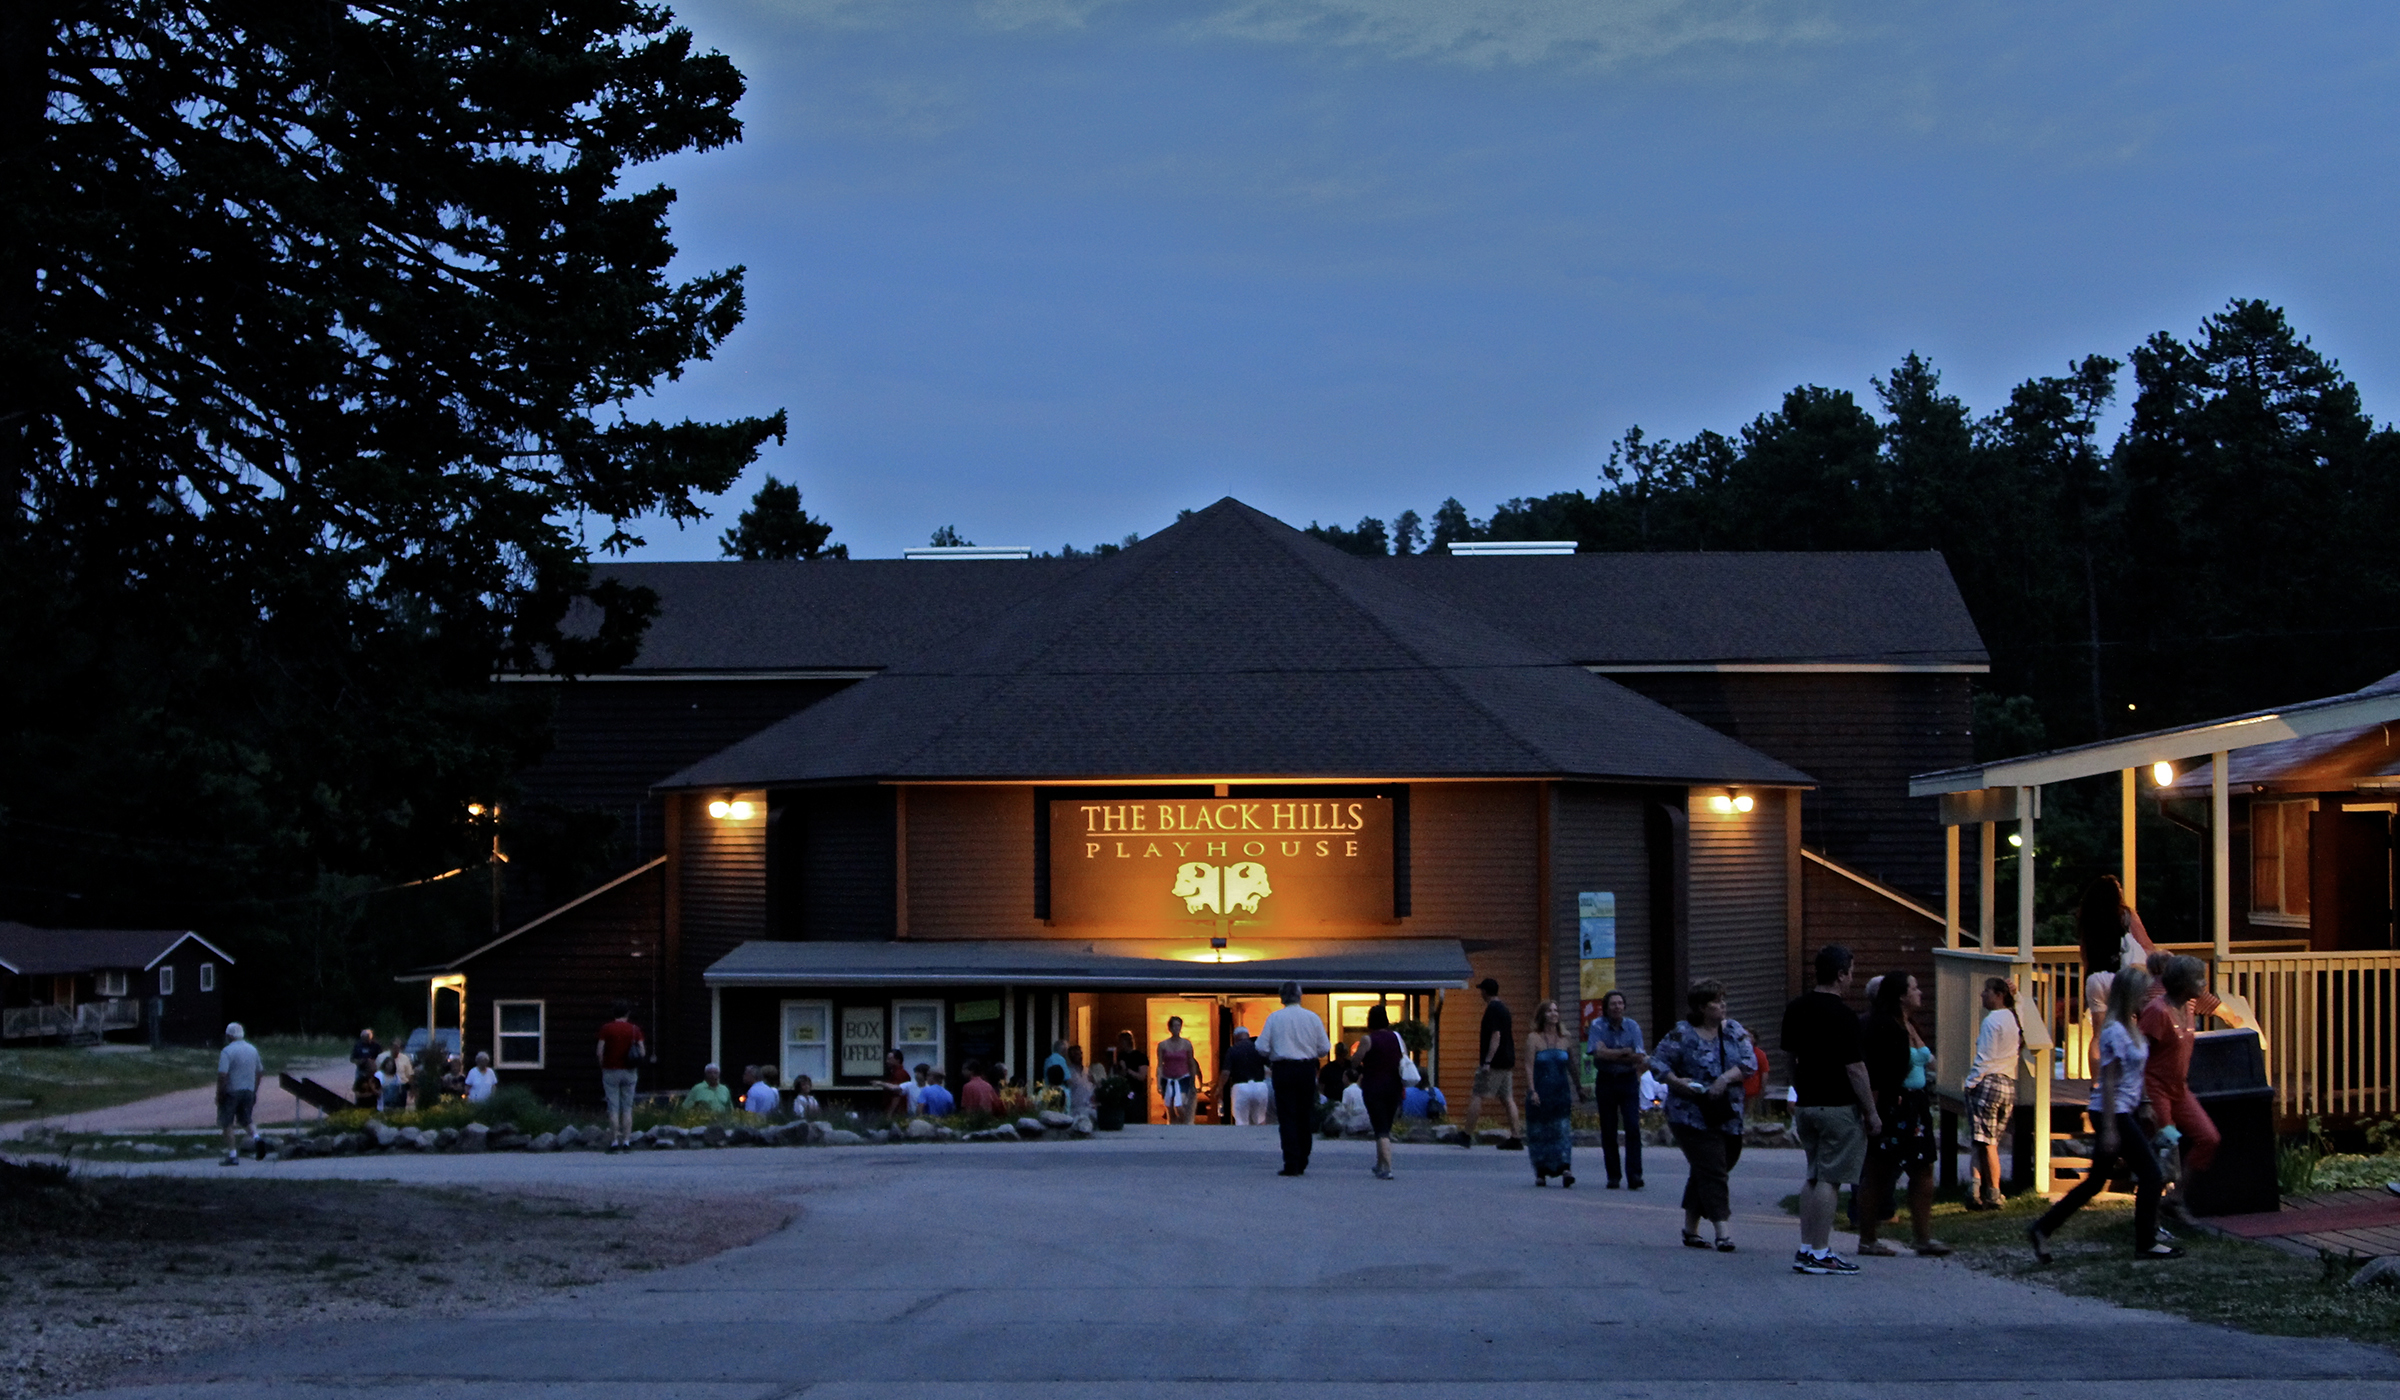 Visitors socializing outside of The Black Hills Playhouse